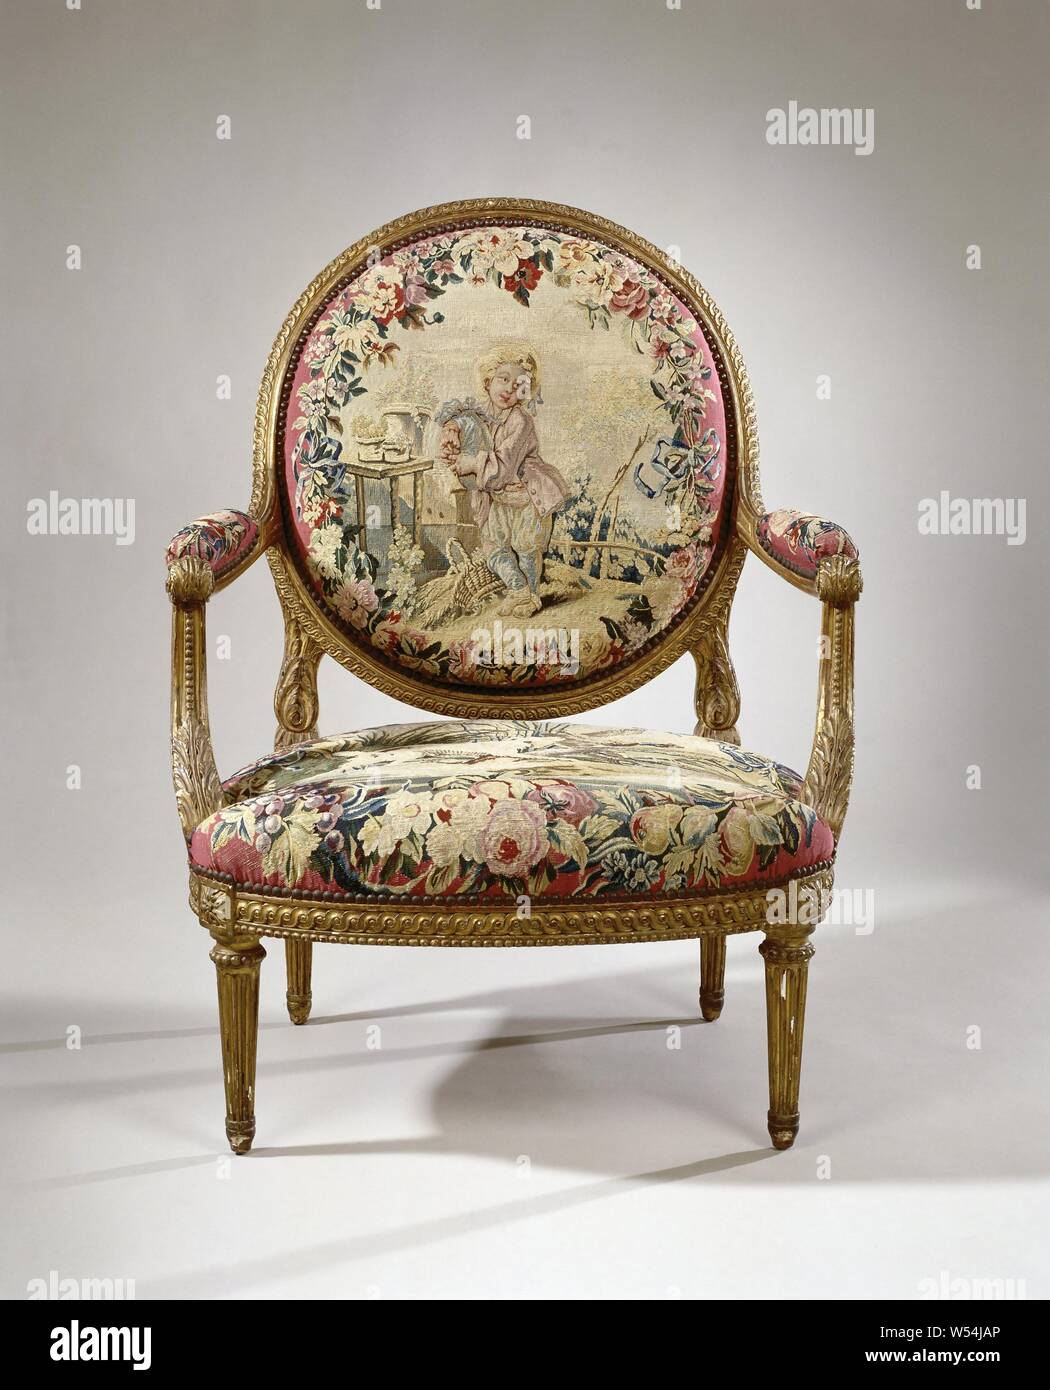 Armchair upholstered in tapestry with a boy playing on a bagpipe (petit joueur de cornemuse) (back) and a dog hunting ducks (seat), Armchair of gilded beech wood, resting on conically shaped legs. The armchair belongs to an ameublement. On the pink curved seat frame and the covered oval back window, on a pink fond, representations are made within flower wreaths (tapestry de Beauvais)., Manufacture Royale des Gobelins, France, c. 1755 - c. 1765 and/or c. 1935, walnut (hardwood), gilding (material), ketting, inslag, gilding, h 101 cm × w 78 cm × d 75 cm h 43 cm × d 53 cm Stock Photo